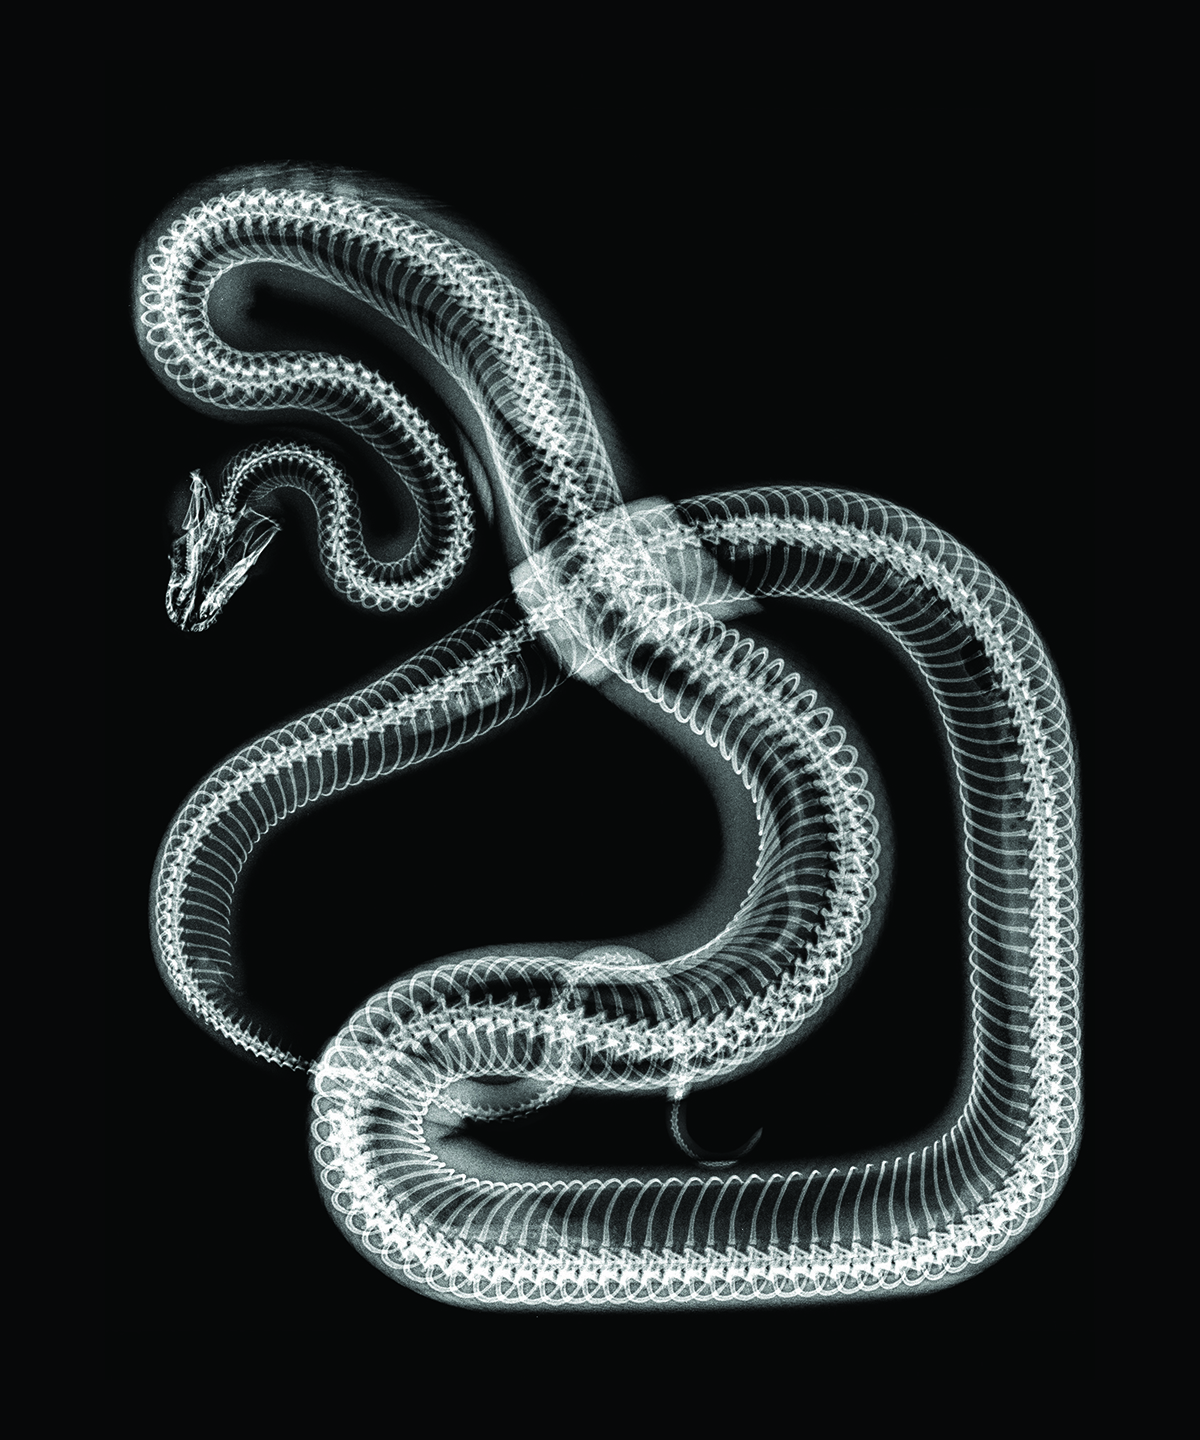 X-ray image of a snake